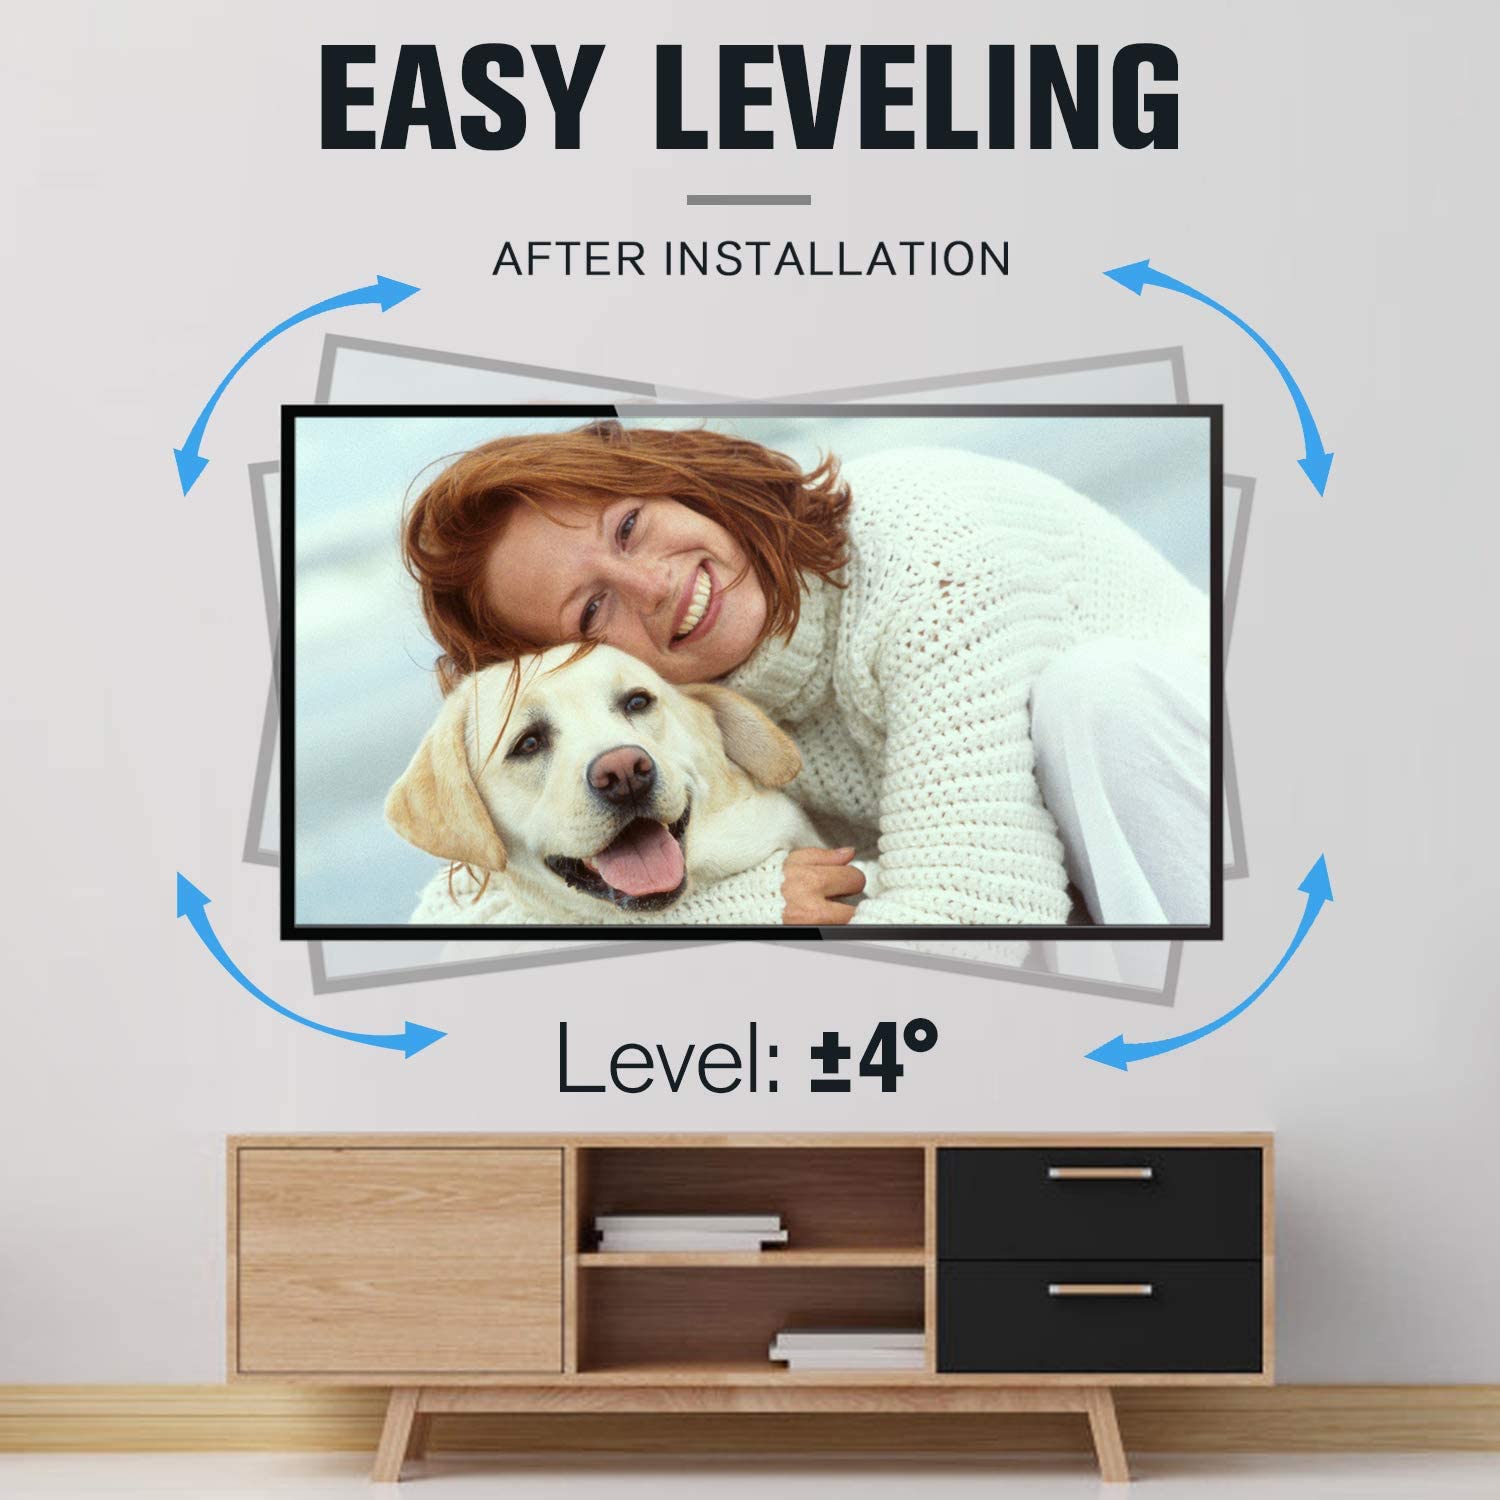 level the TV 4 degree after installation